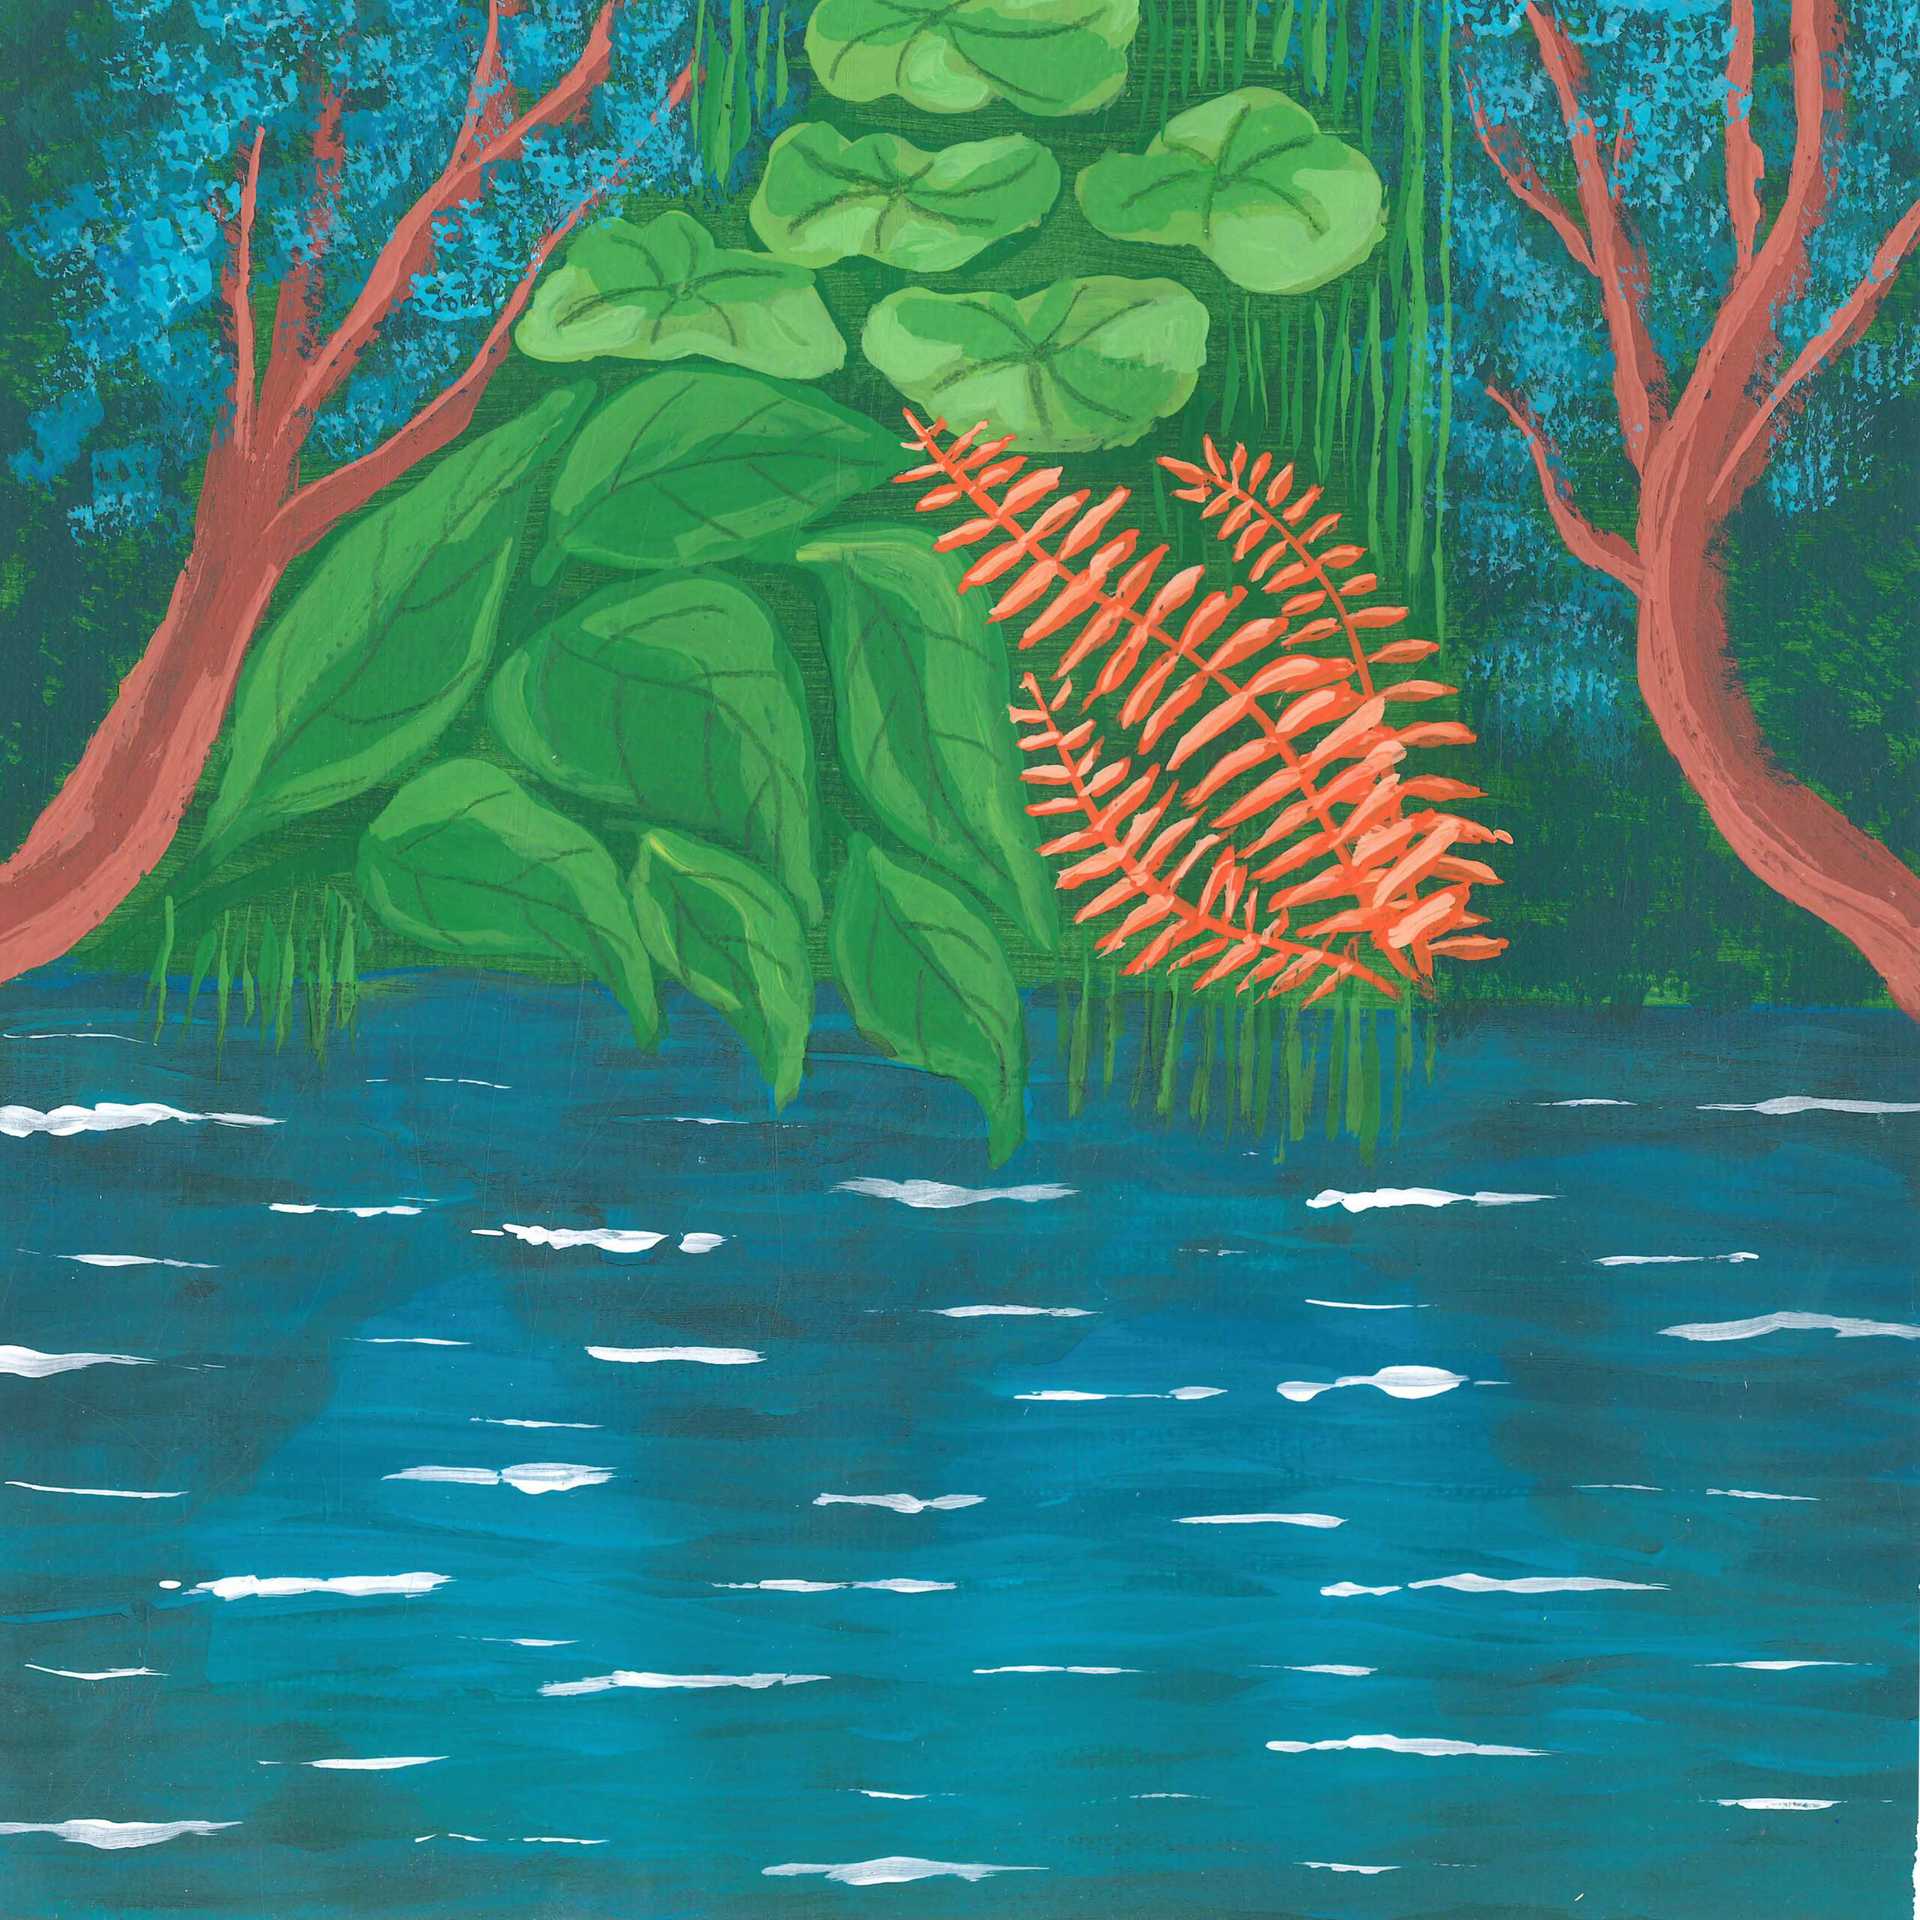 Midnight in Borneo’s Rainforest - nature landscape painting - earth.fm